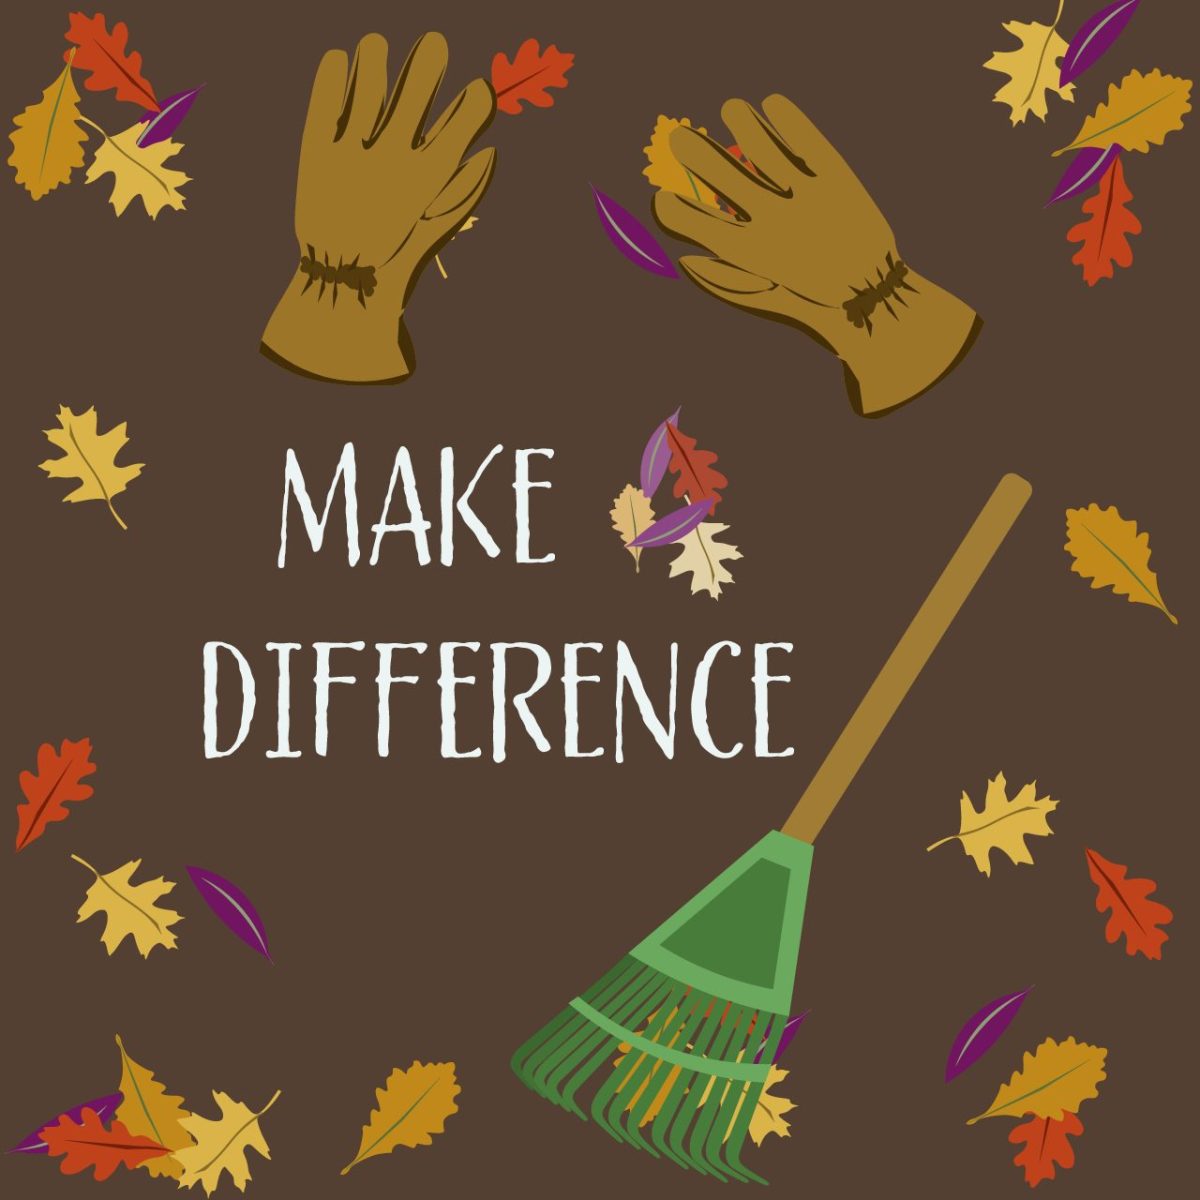 MAKING A CHANGE — Make A Difference Day is being hosted by the NMU Volunteer Center, supporting the Marquette community by raking leaves for those who cannot. 